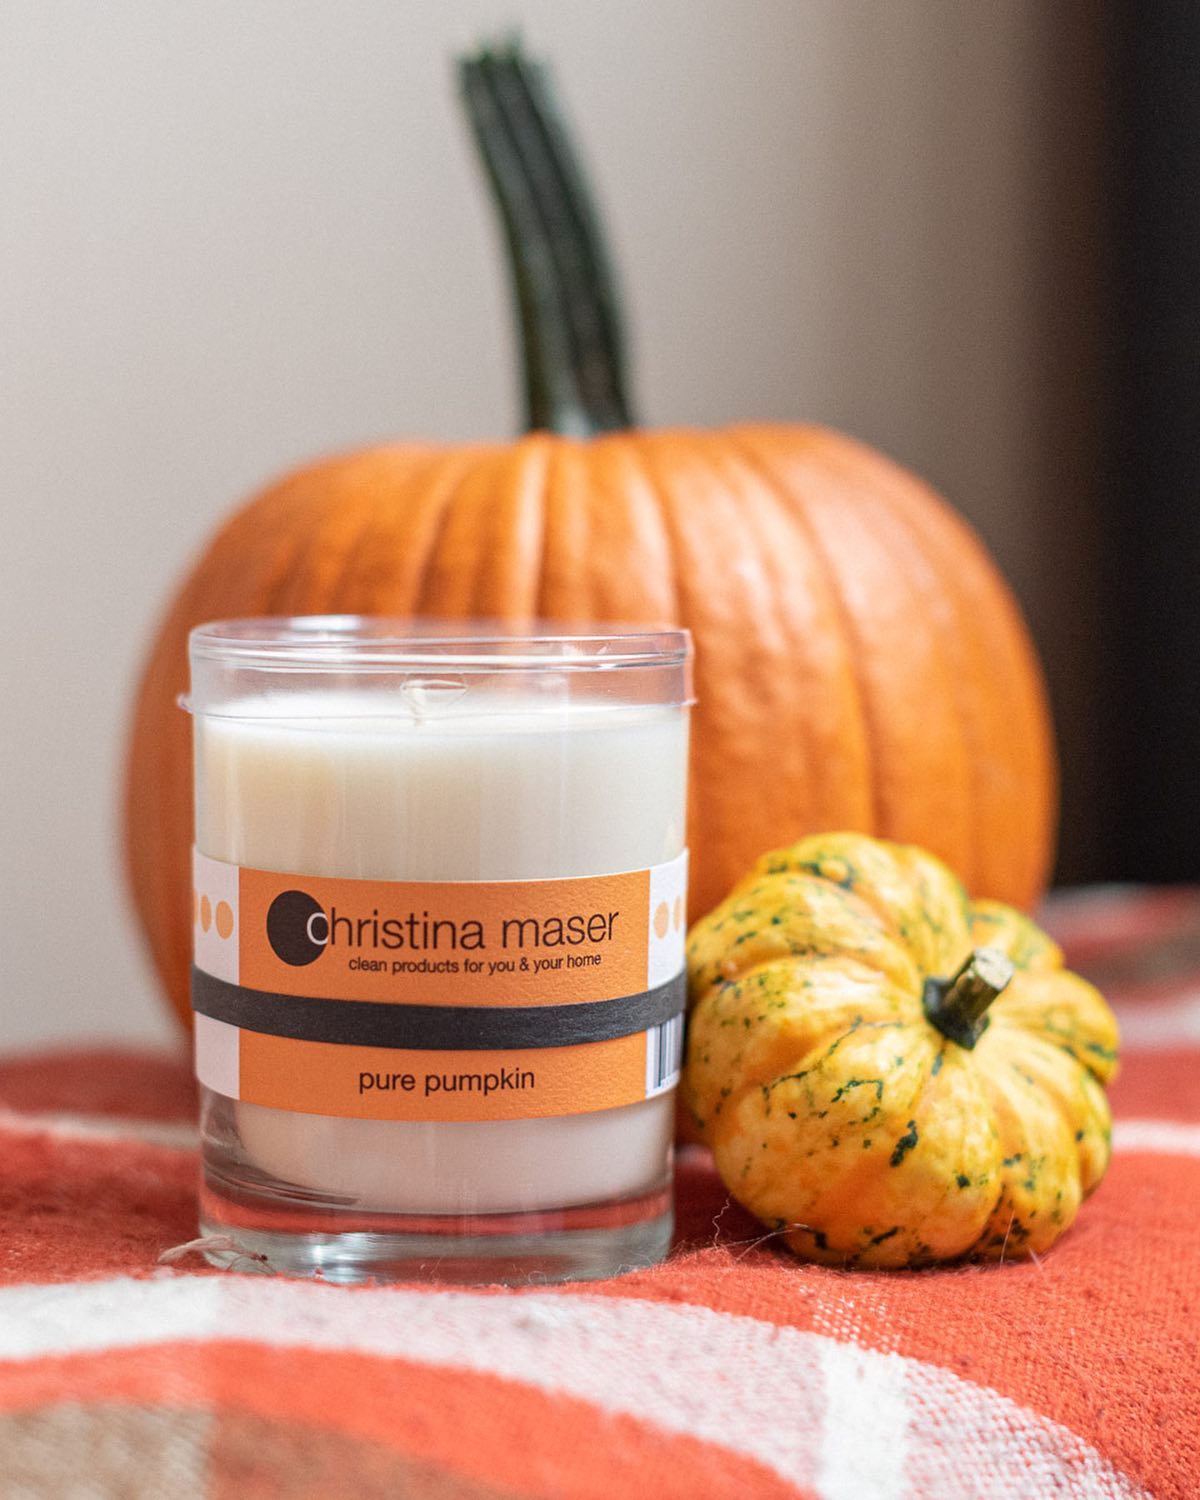 Toasted Pumpkin & Spice Scented  Pure Soy Wax Melt – Lasting Impression  Candle Company